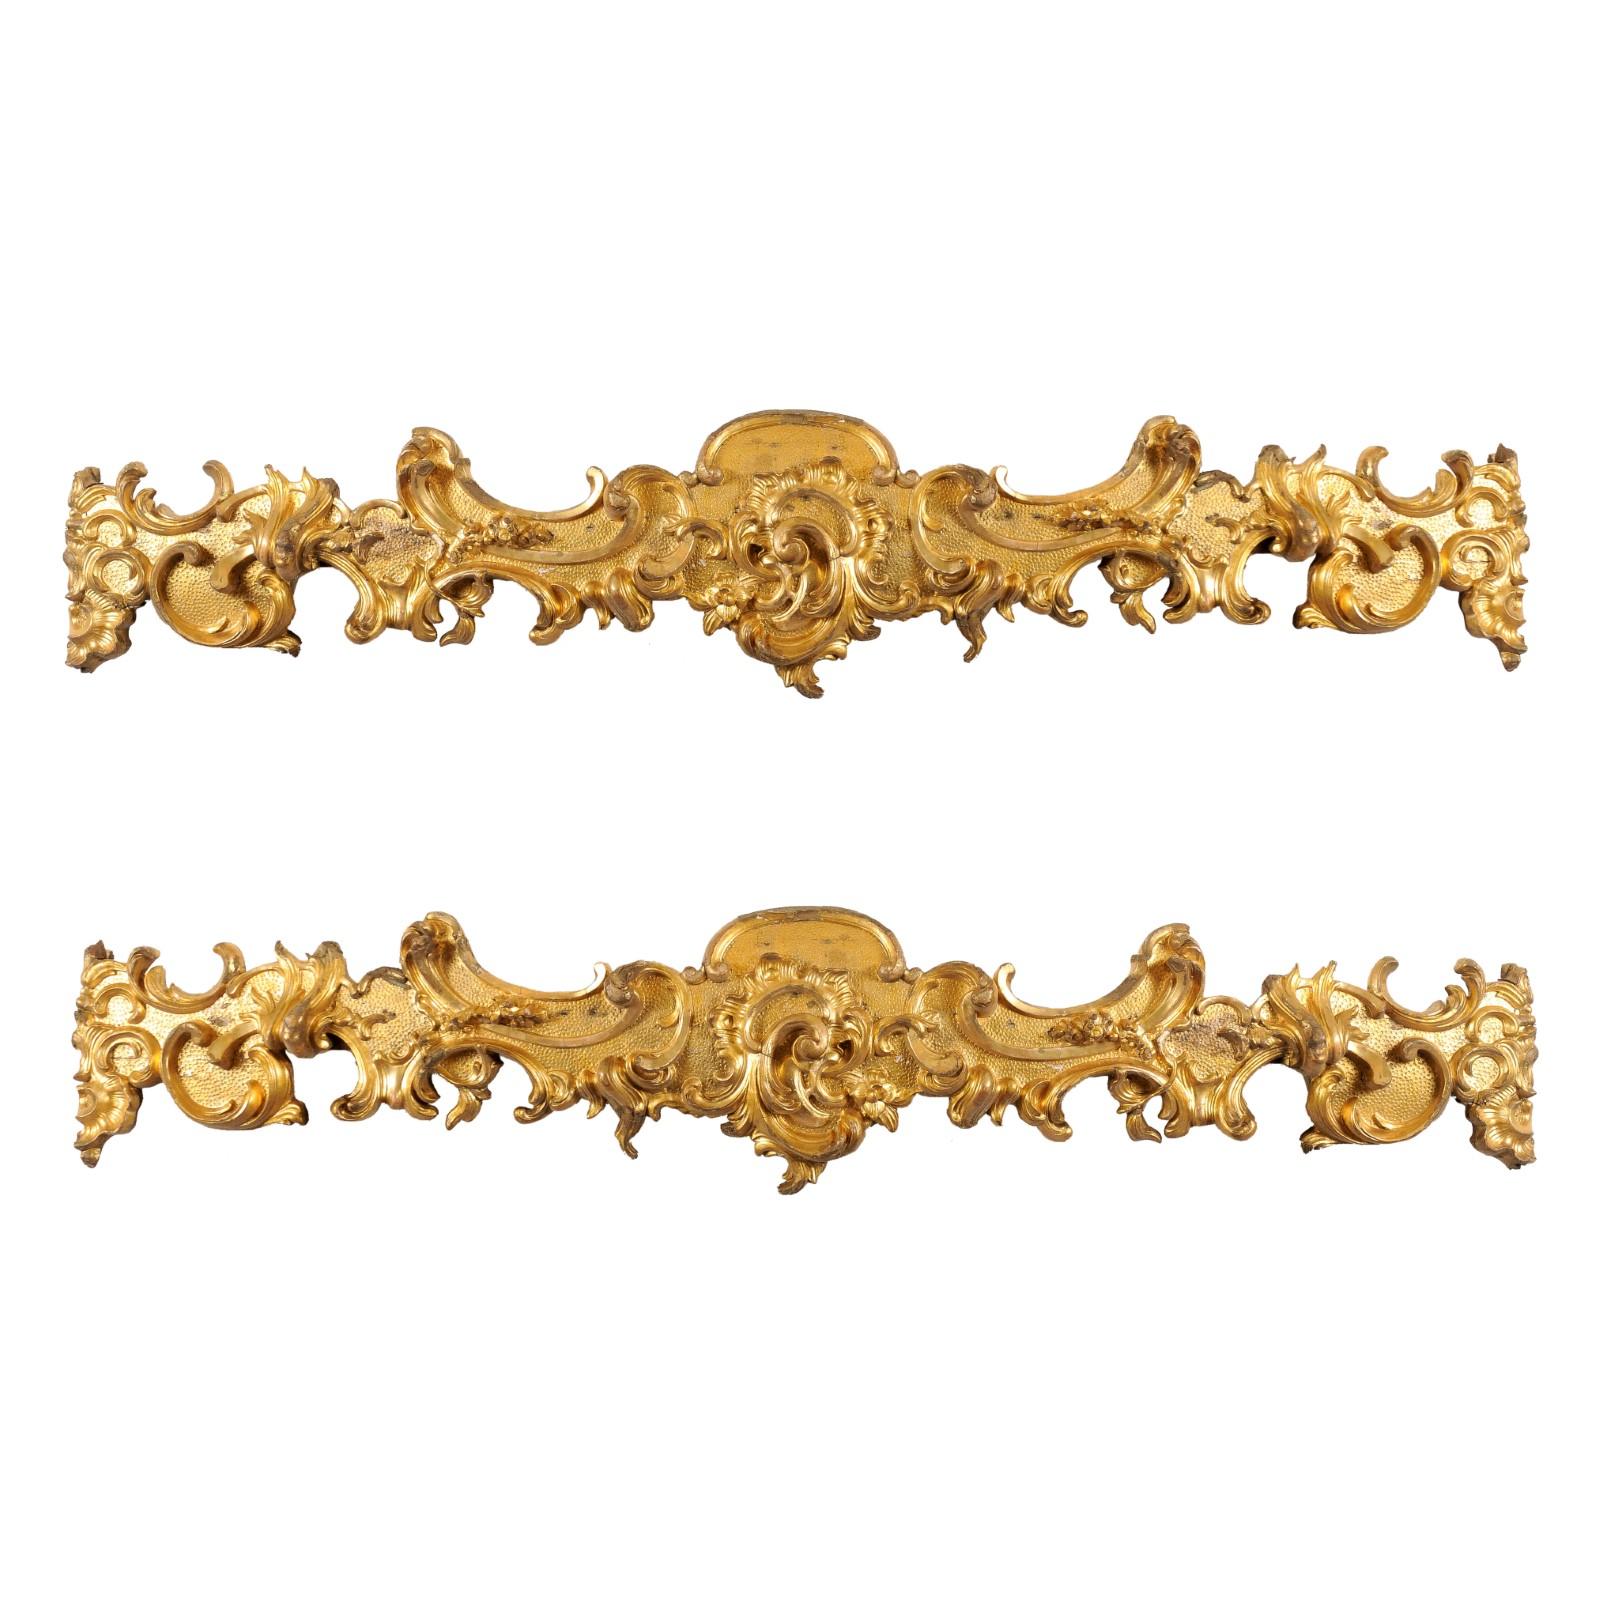 Pair of Large Giltwood Architectural Elements/Window Valences, ca. 1890